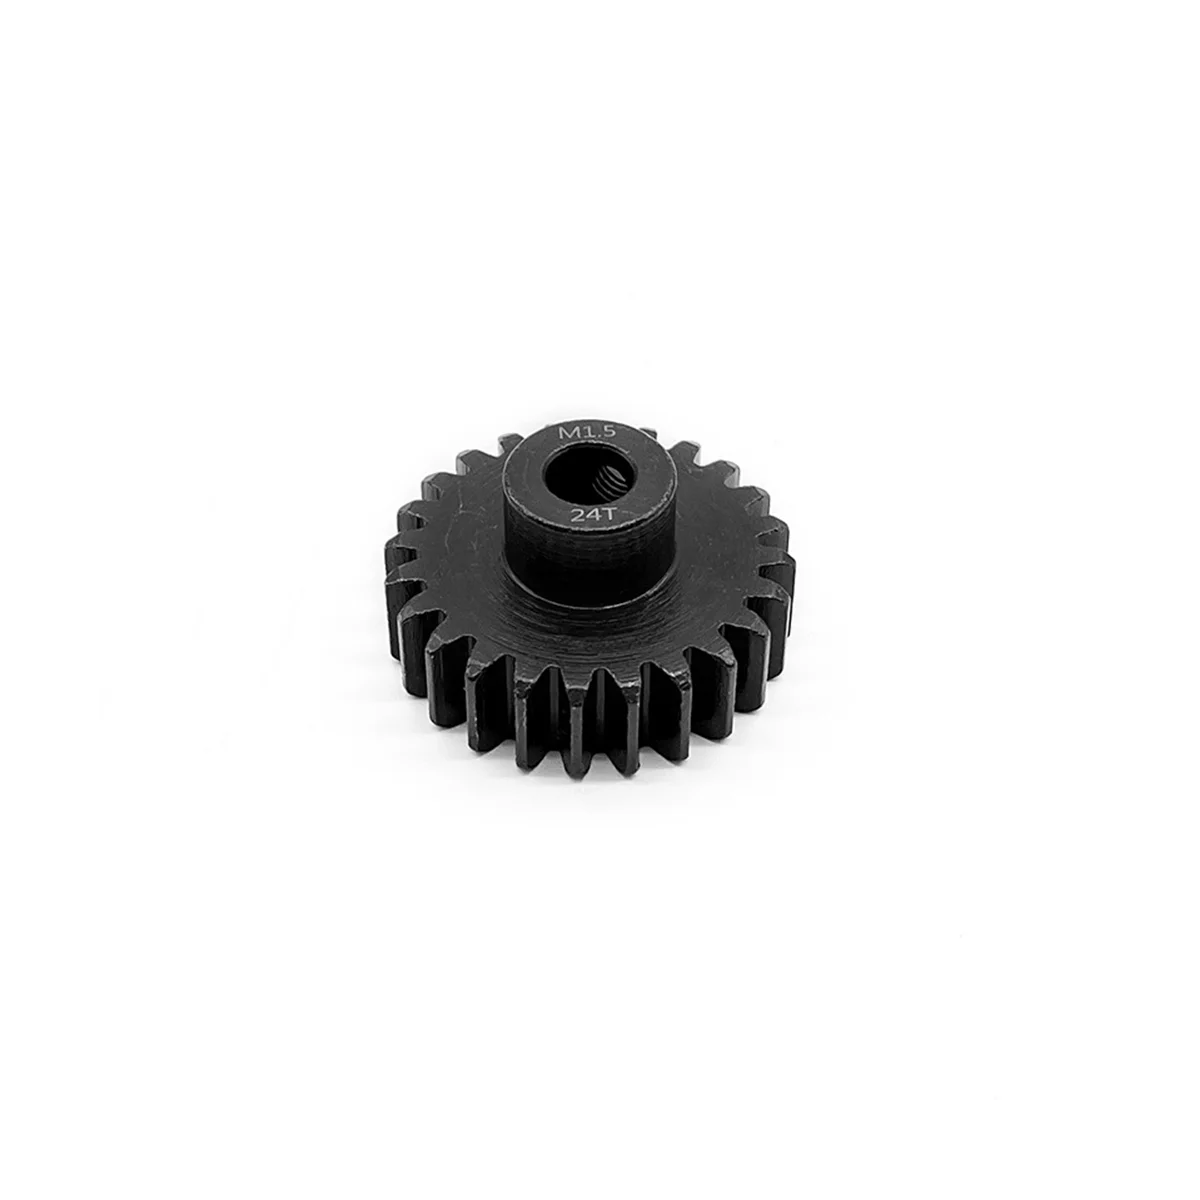 

Remote Control Car Gear M1.5 Modulus 8.0 Inner Hole for Chrome Steel Motor Gear with M5 Machine Metric Screw,24T